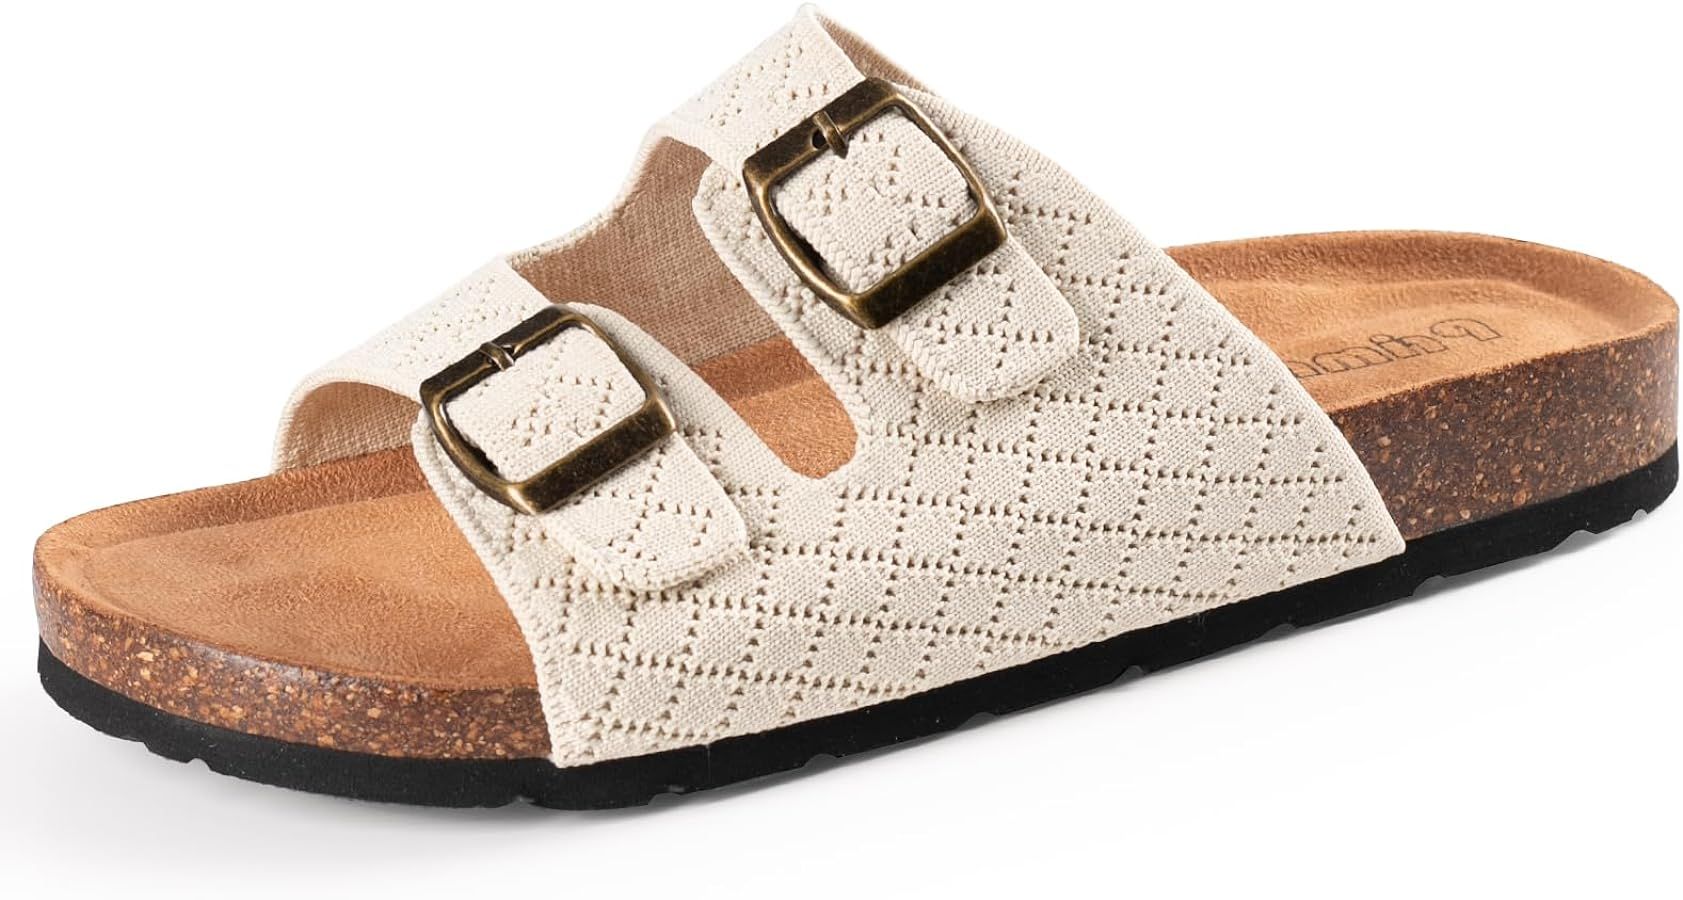 Women's Comfy Arch Support Cork Footbed with Adjustable Unique Knitting Straps Slides Sandals | Amazon (US)